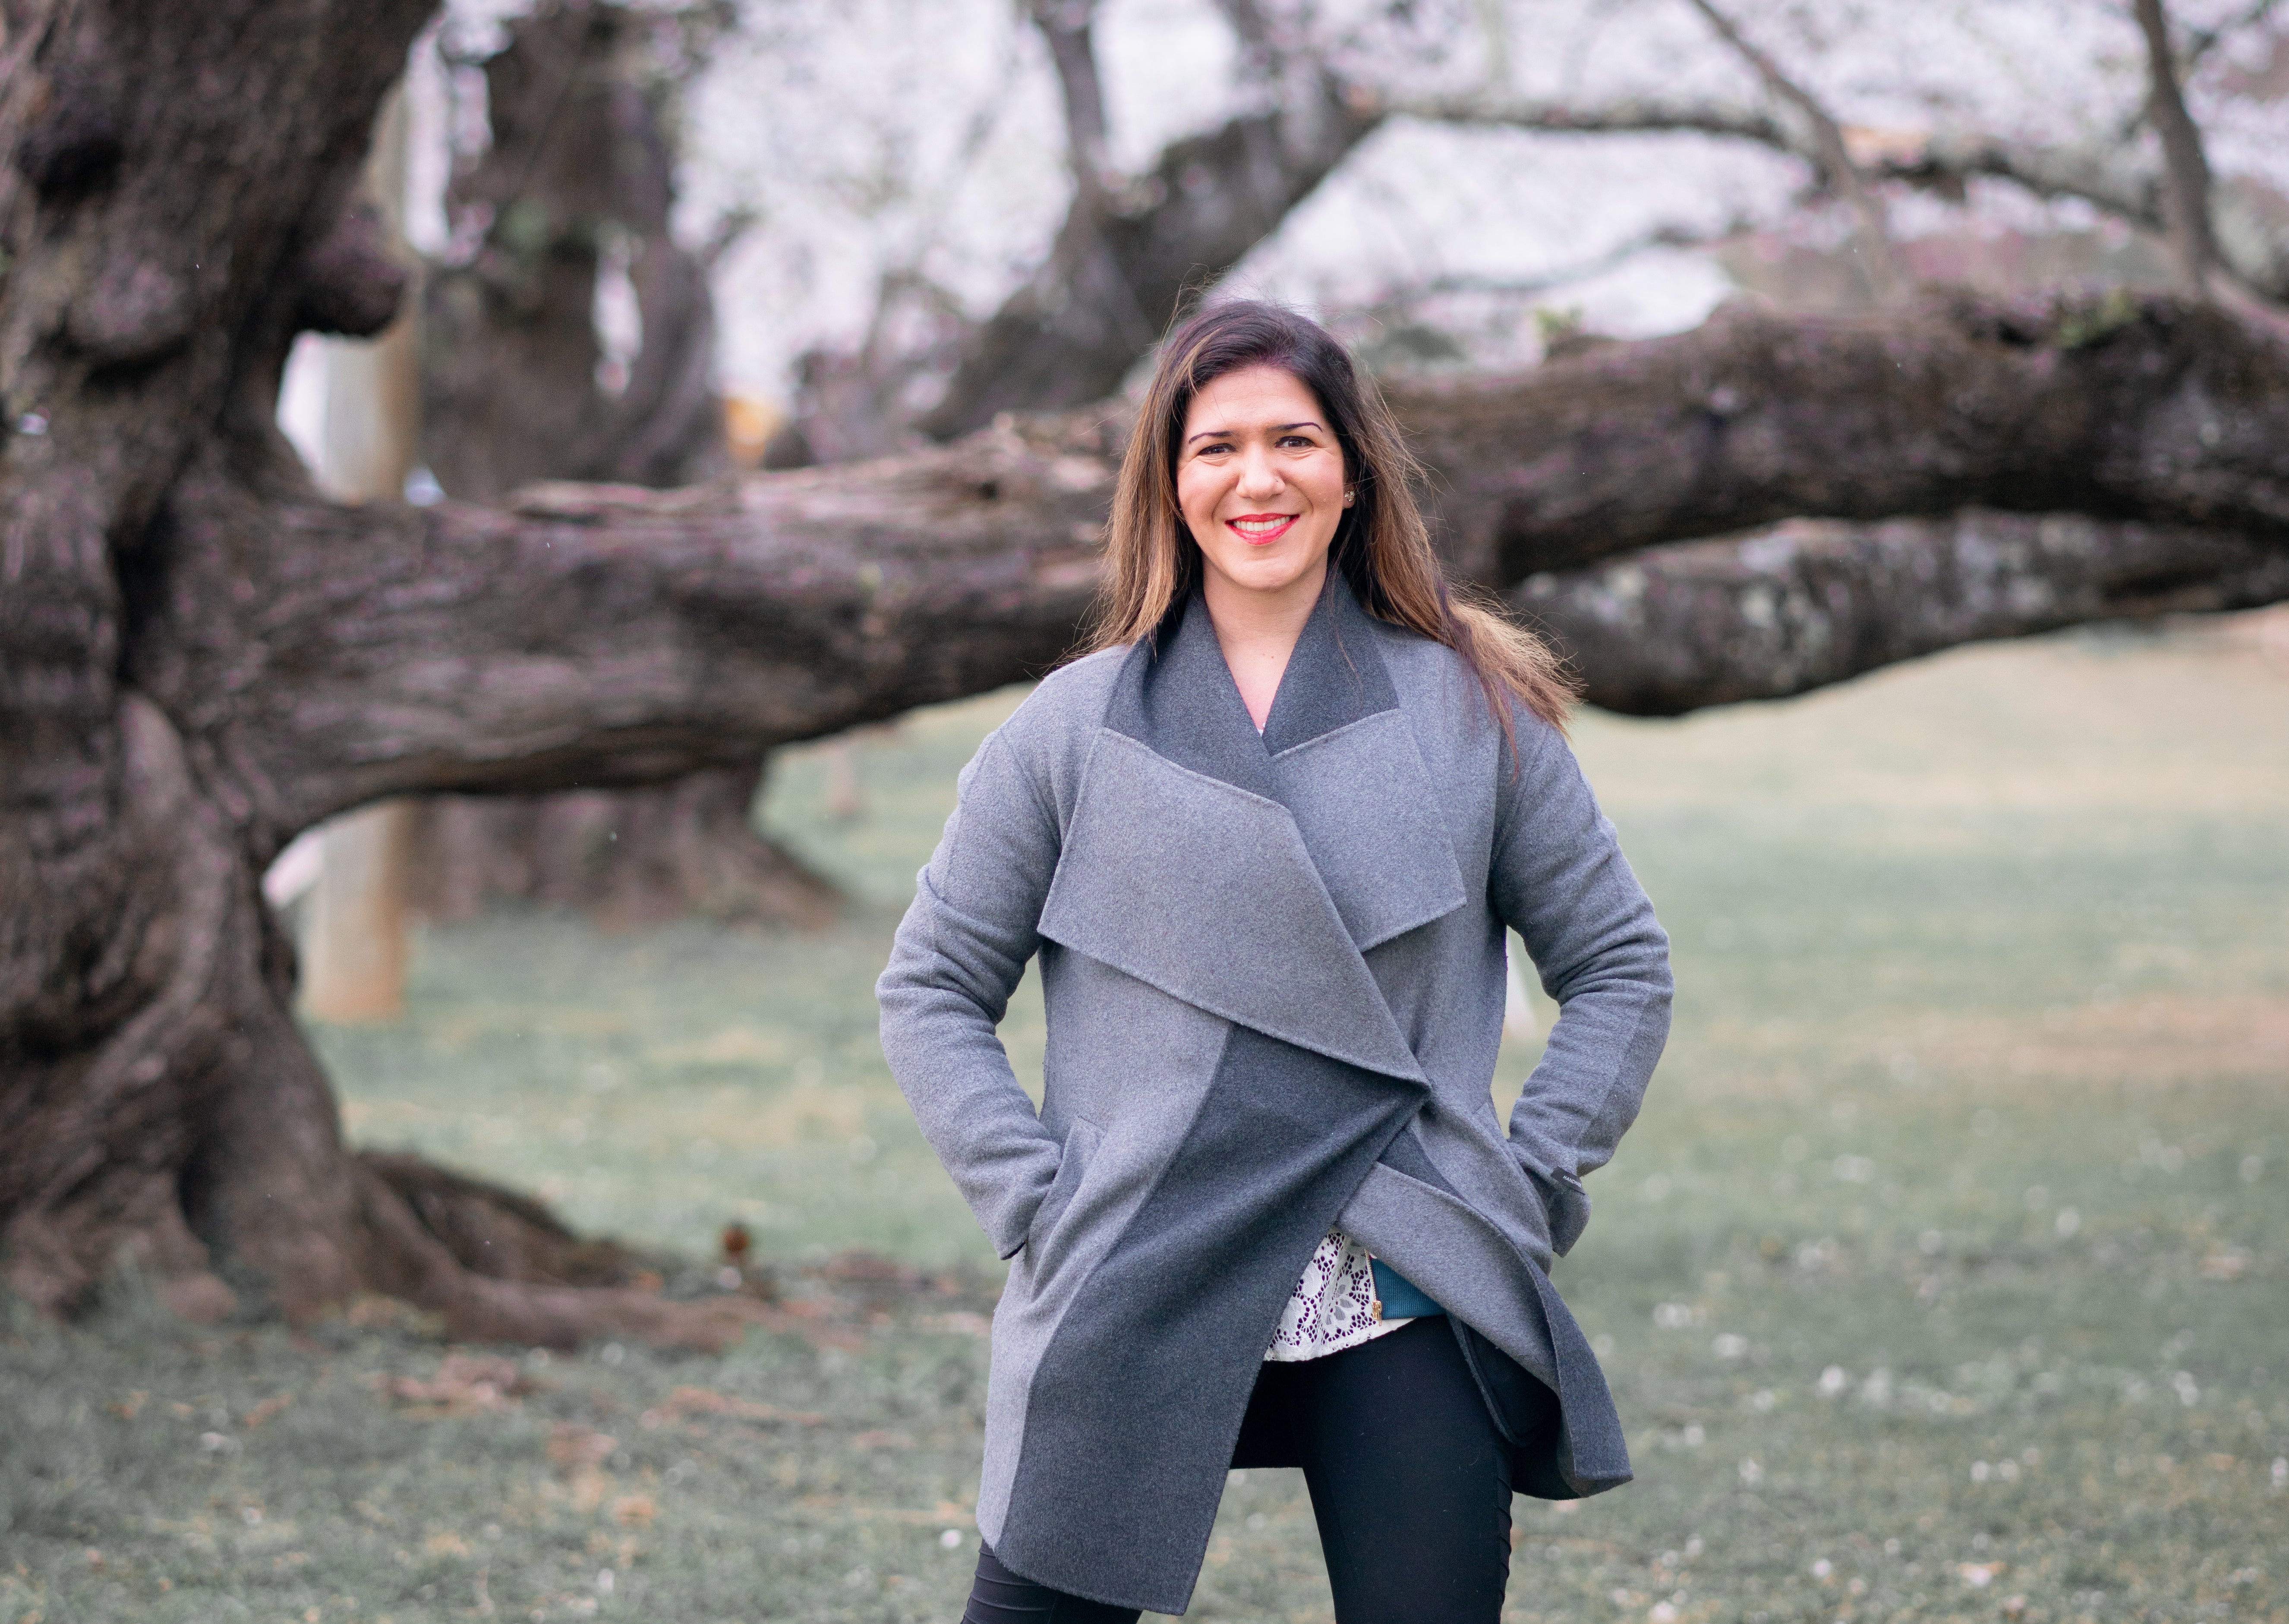 Photograph of Lauren, a white woman with long brown hair, standing in front of a tree wearing a grey coat.